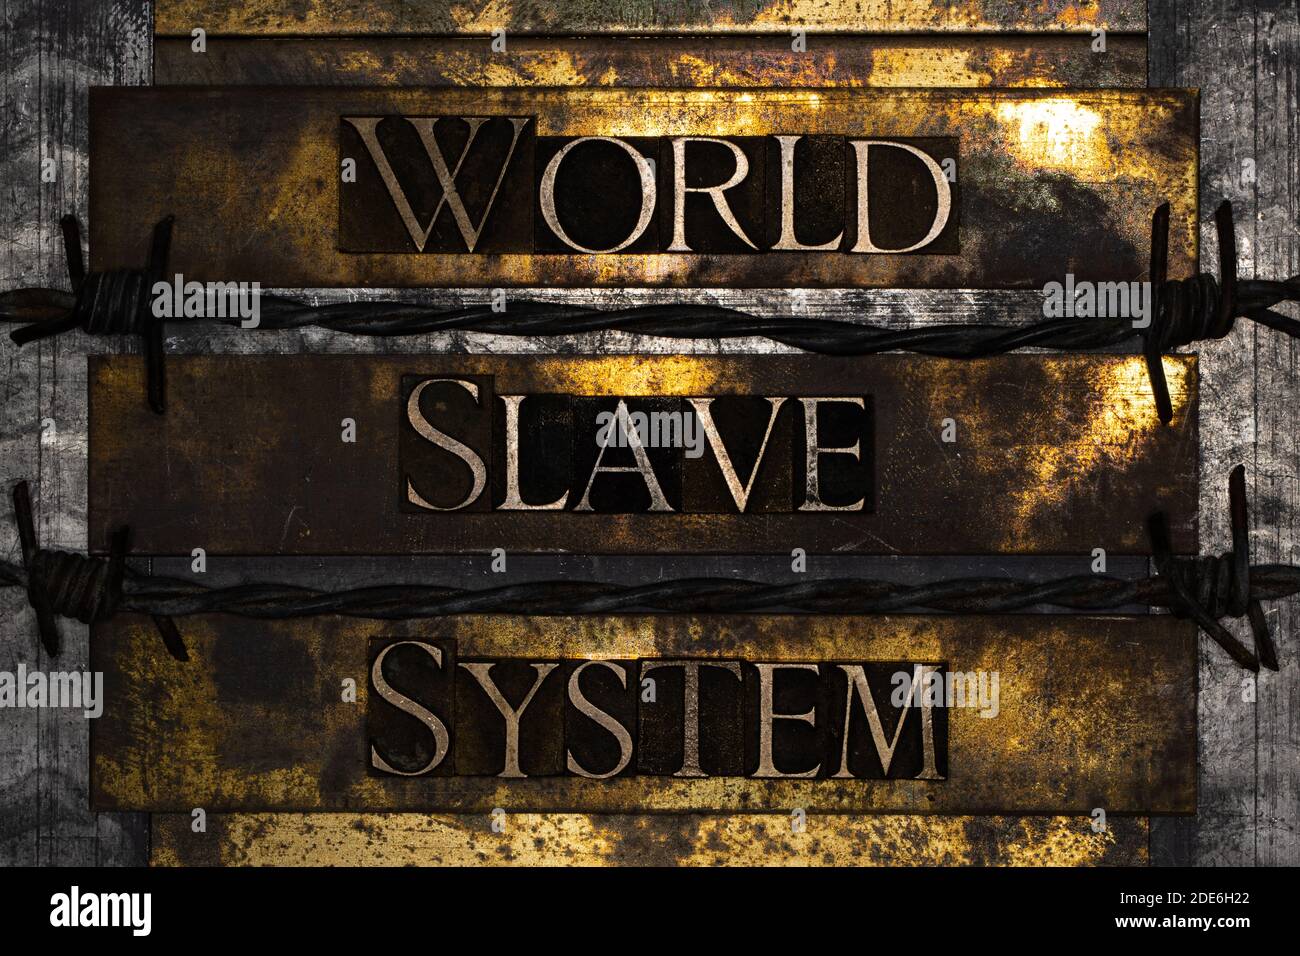 World Slave System text on textured grunge copper and vintage gold background Stock Photo